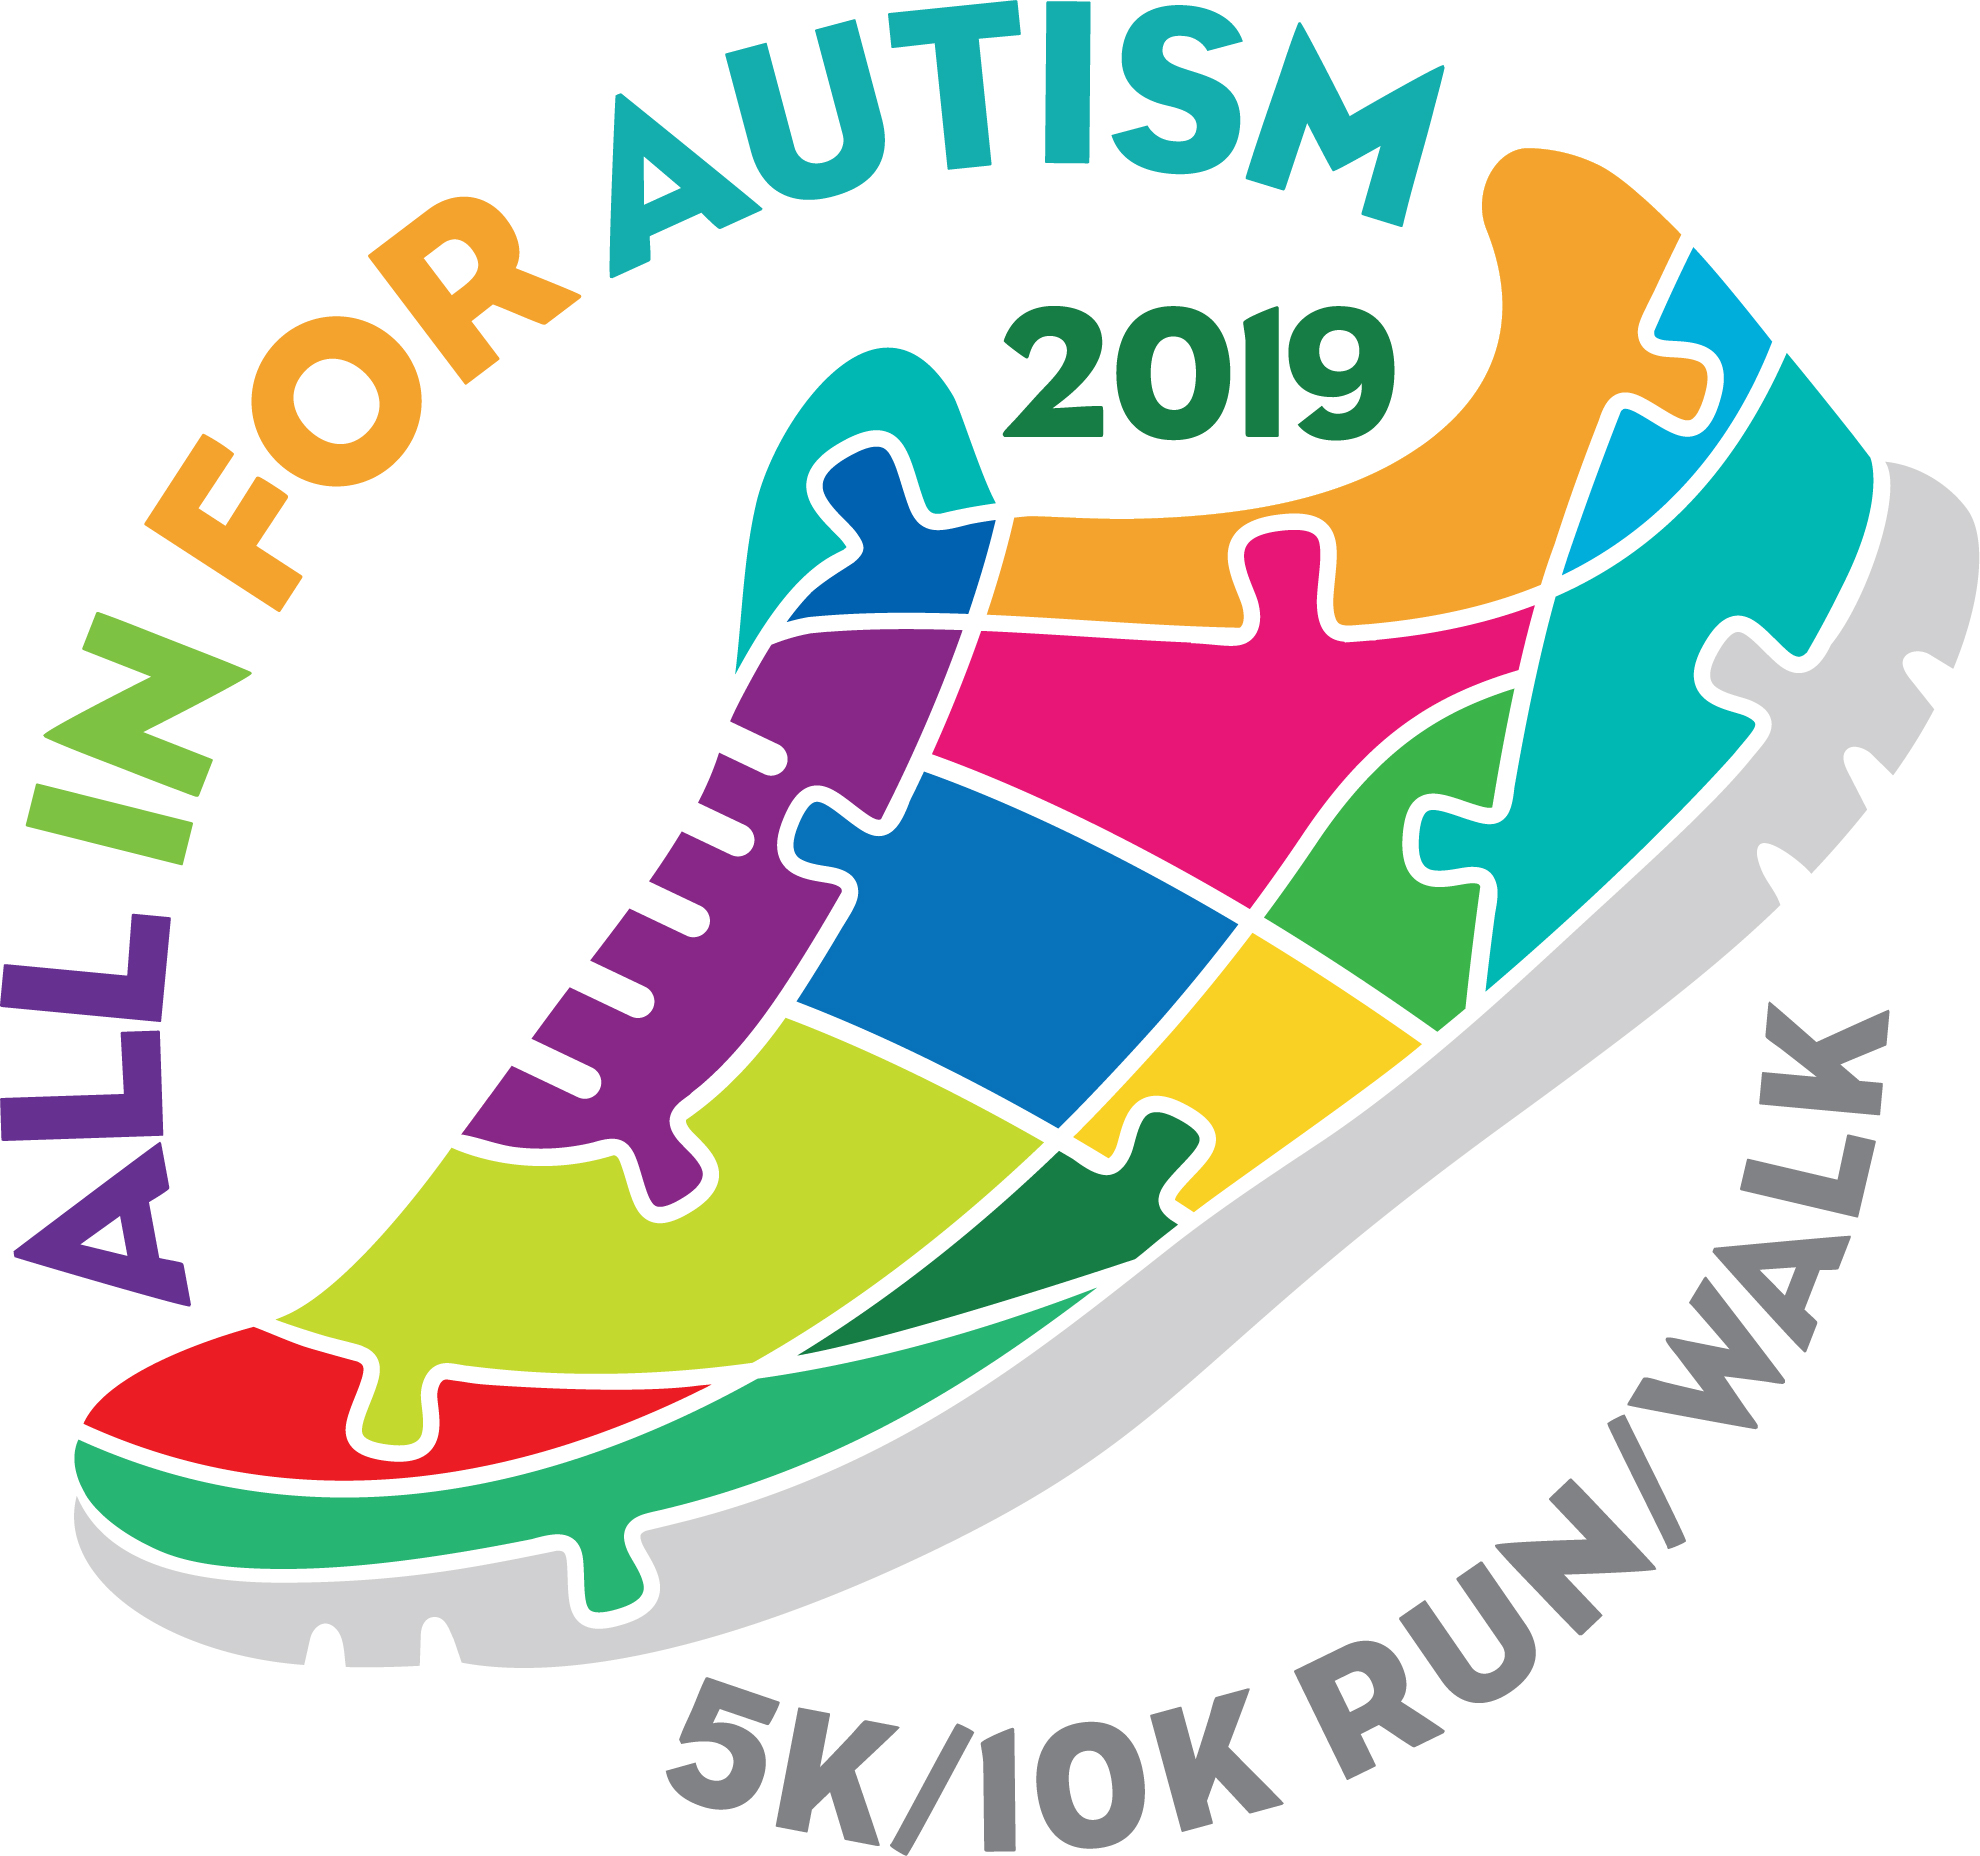 All In For Autism